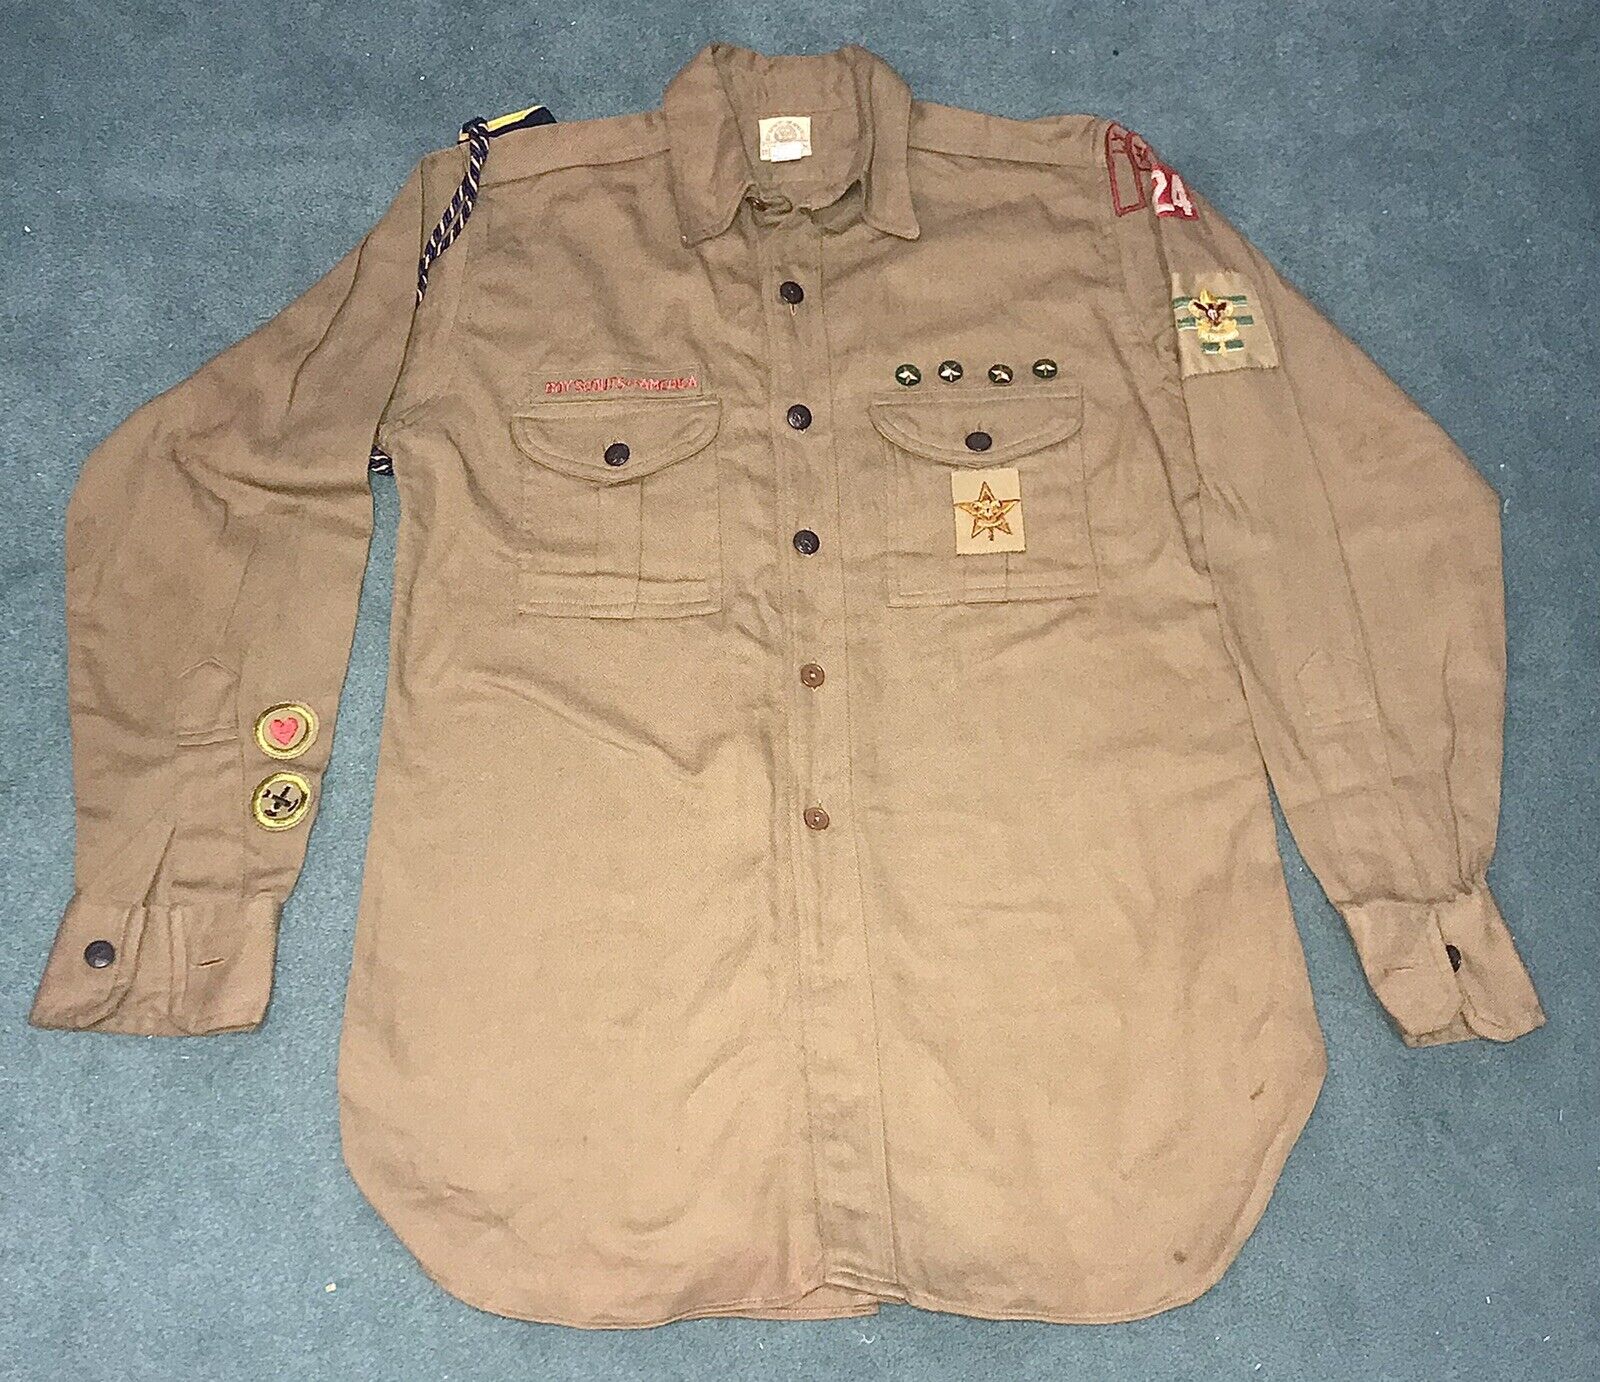 Vintage Early BSA Boy Scout Shirt Star Scout & Assistant Scout Leader Patches